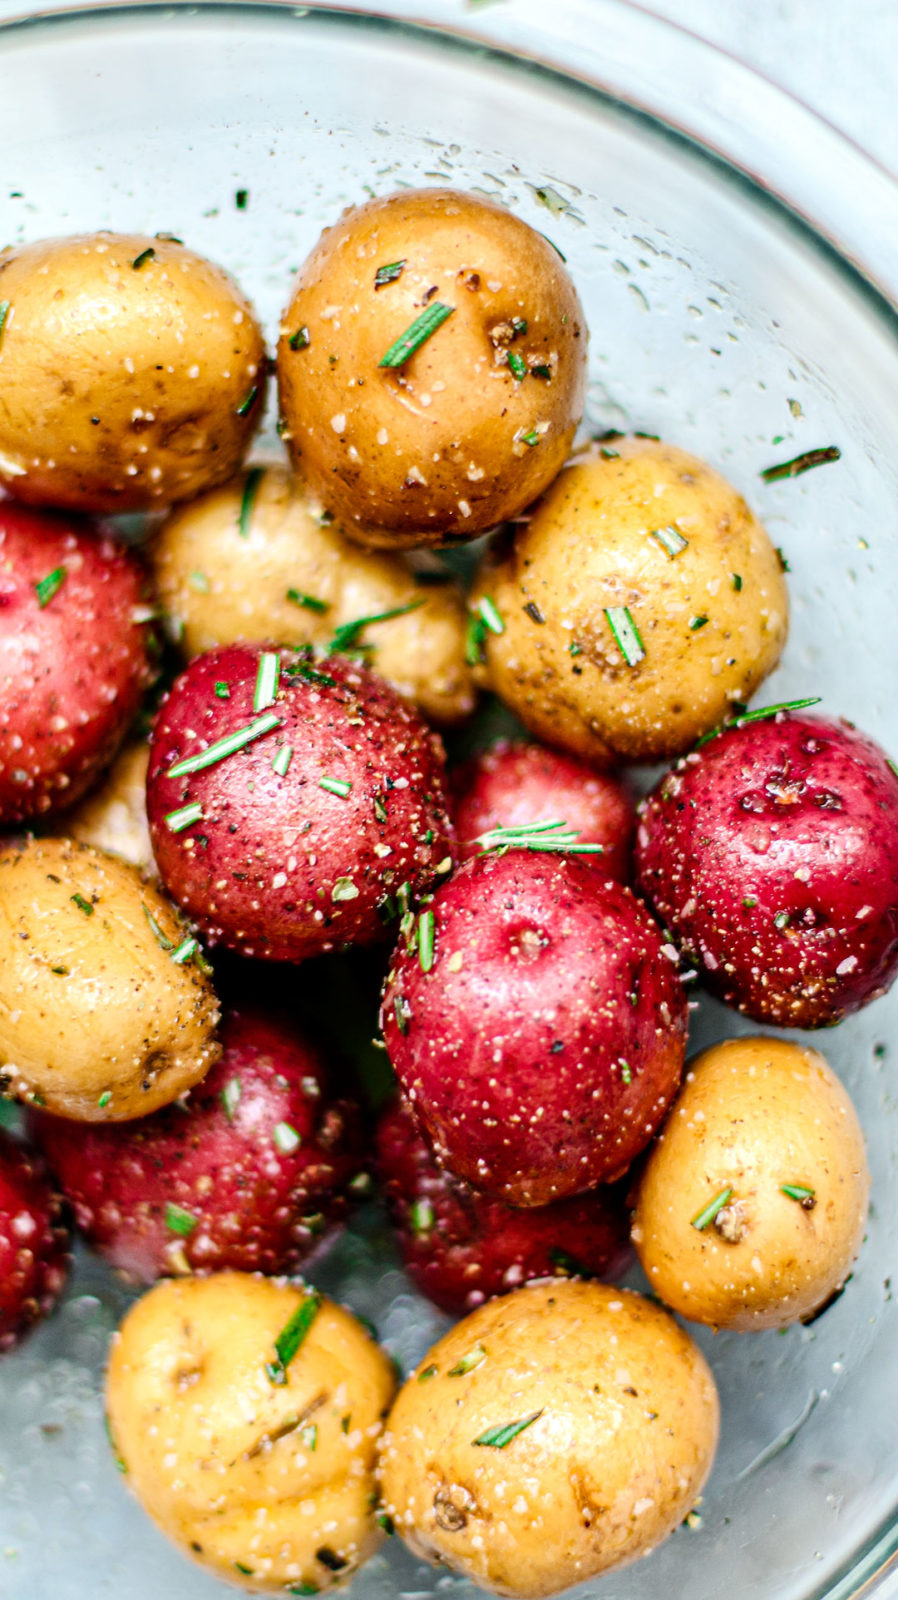 Bowl of potatoes with olive oil and rosemary.